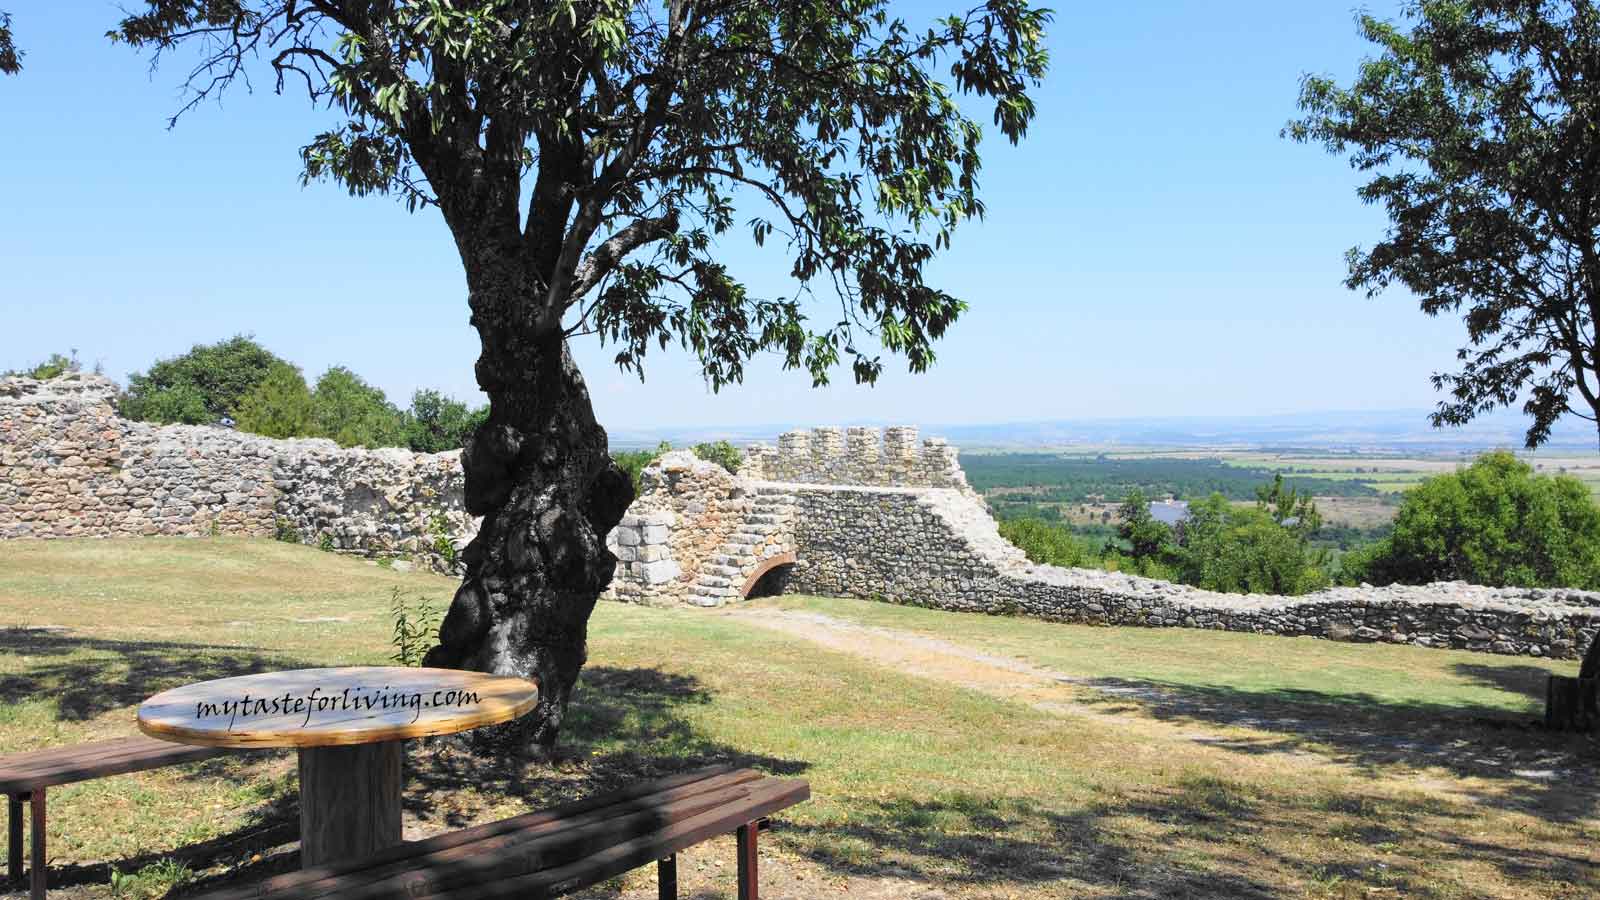 Near the village of Mezek, municipality of Svilengrad, there is a very well-preserved medieval Byzantine fortress, but very little is known about it. According to some researchers, her name is "Neutzikon". Its ruins have the status of an archaeological cultural monument of national importance. The place is extremely well maintained and pleasant to visit. There are benches under the trees where you can admire beautiful views of the village of Mezek, the Upper Thracian Plain and Sakar Mountain. 